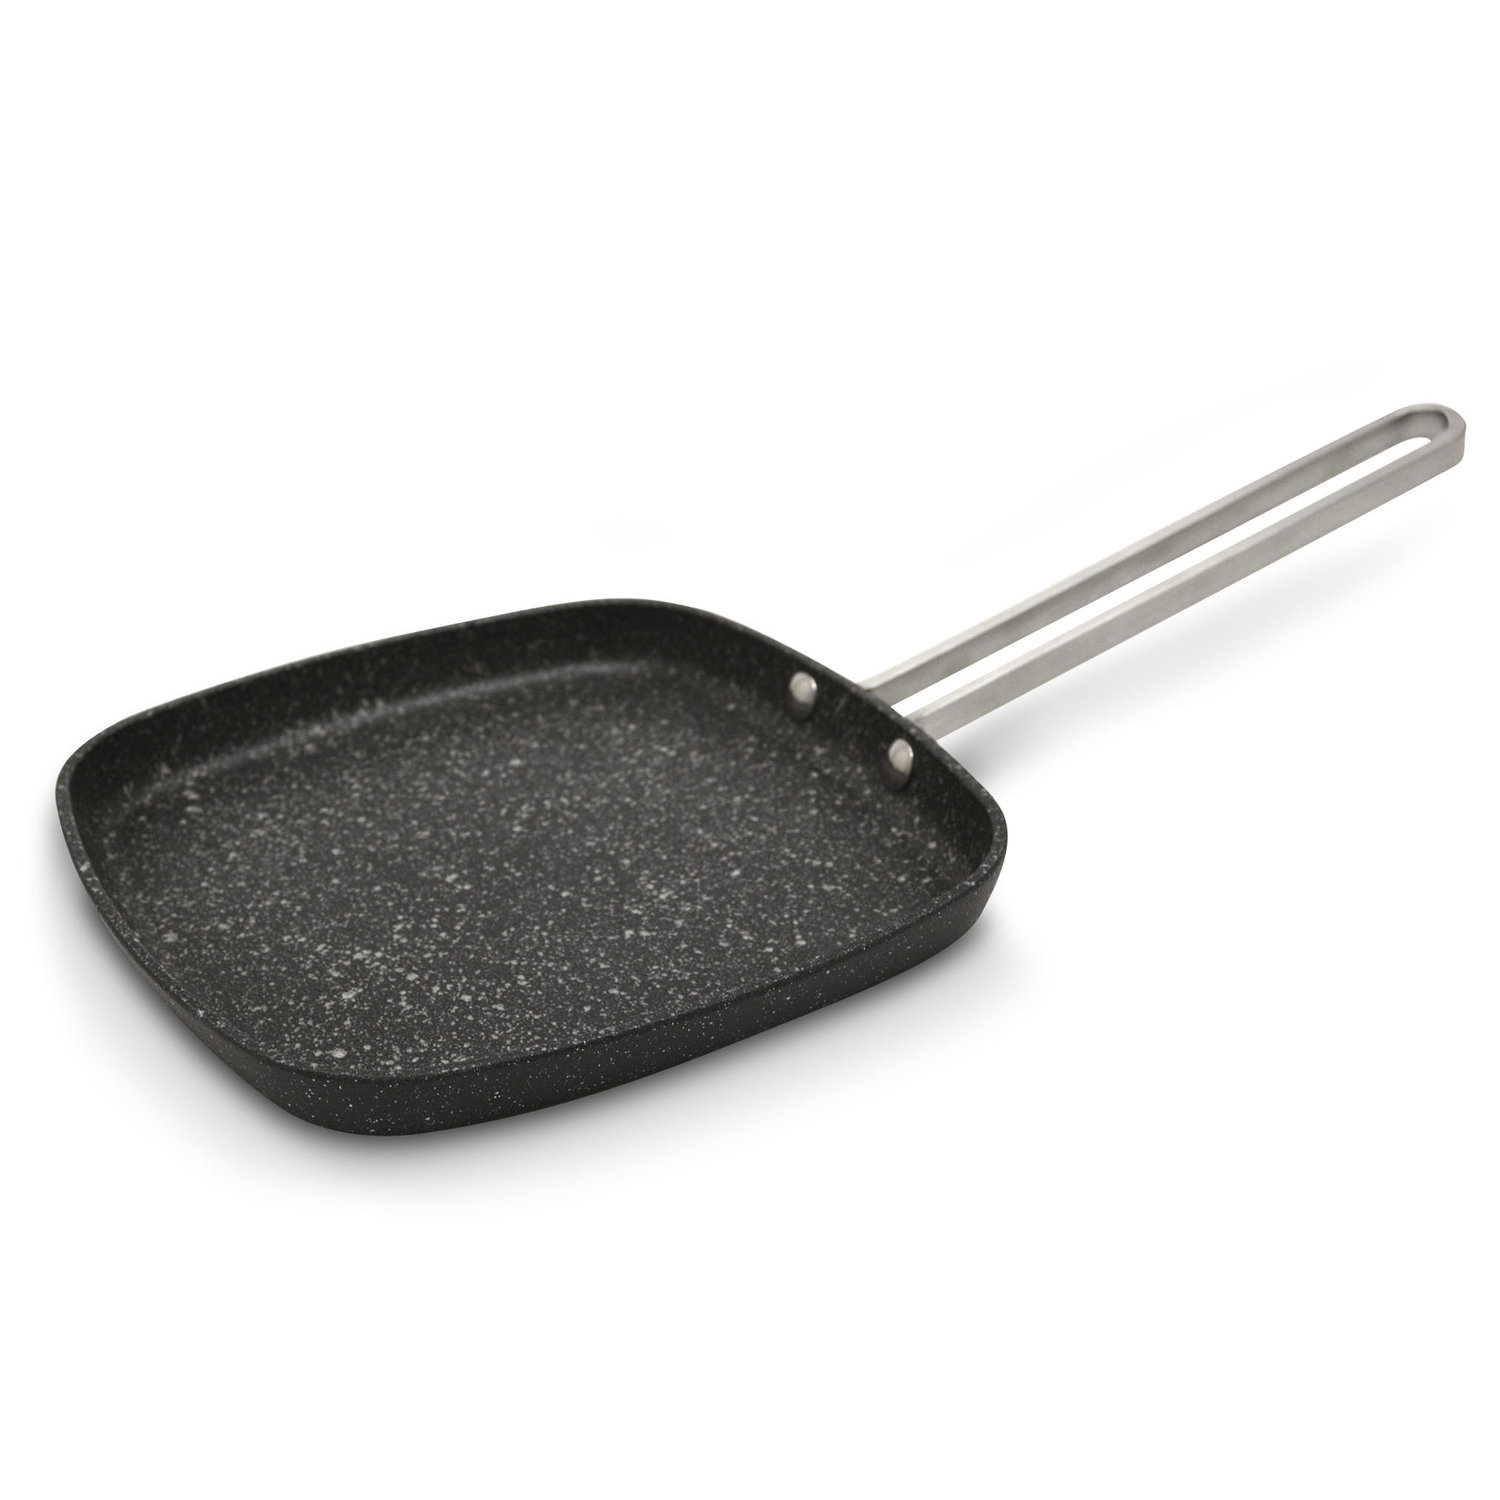 Starfrit 4.7 qt. 11 in. Deep Saute Pan with Glass Lid and